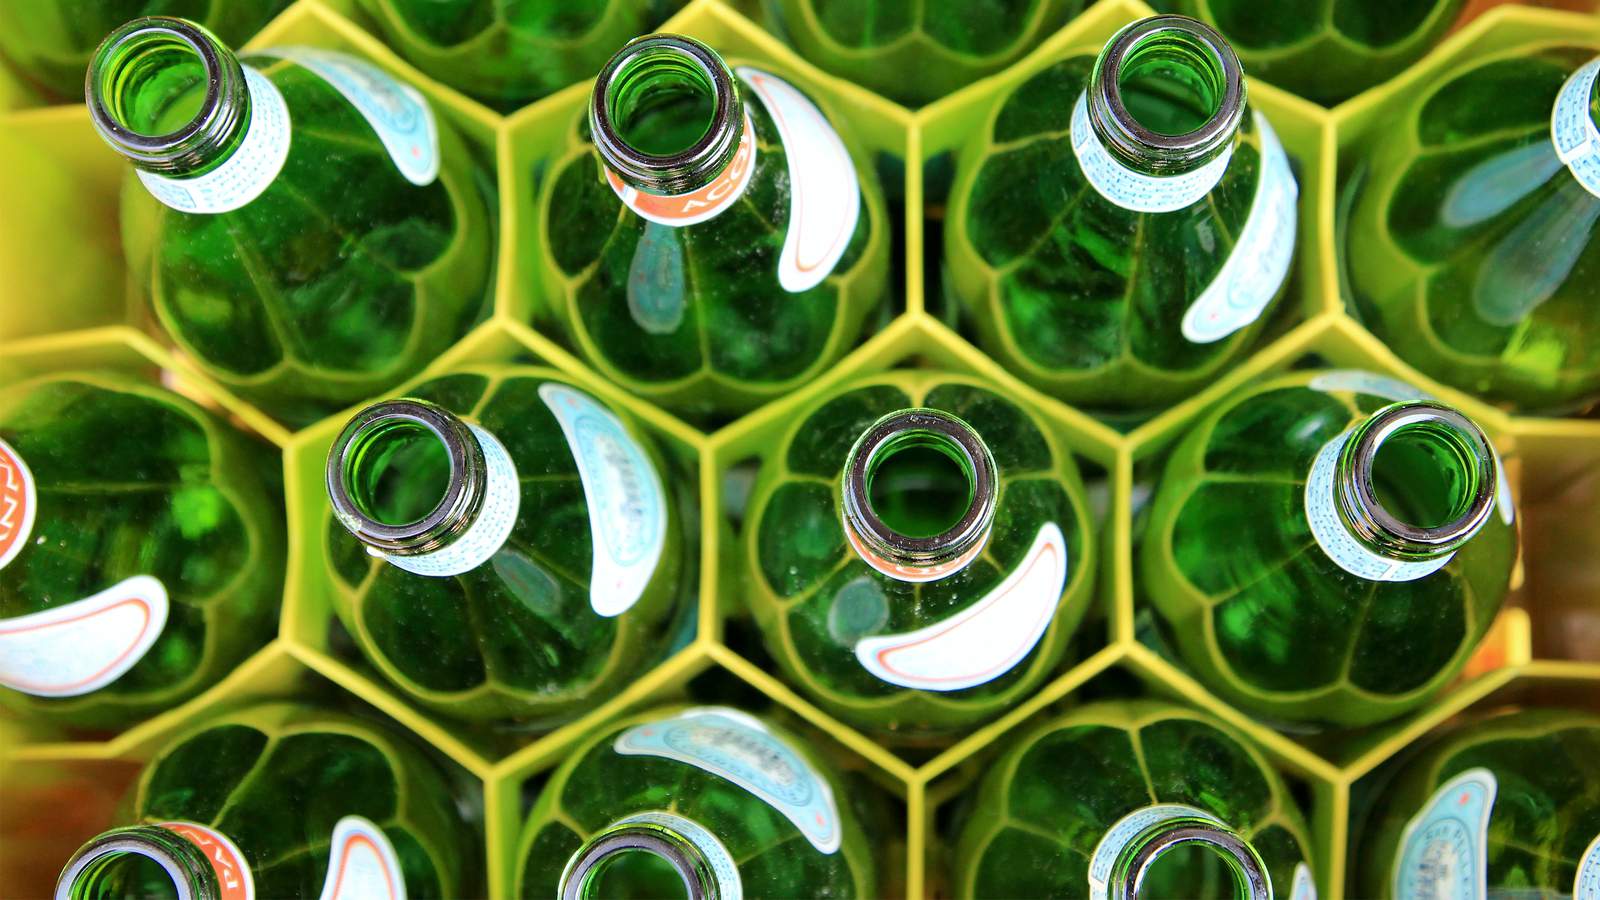 List: Organizations to donate your stockpile of cans, bottles to amid the pandemic